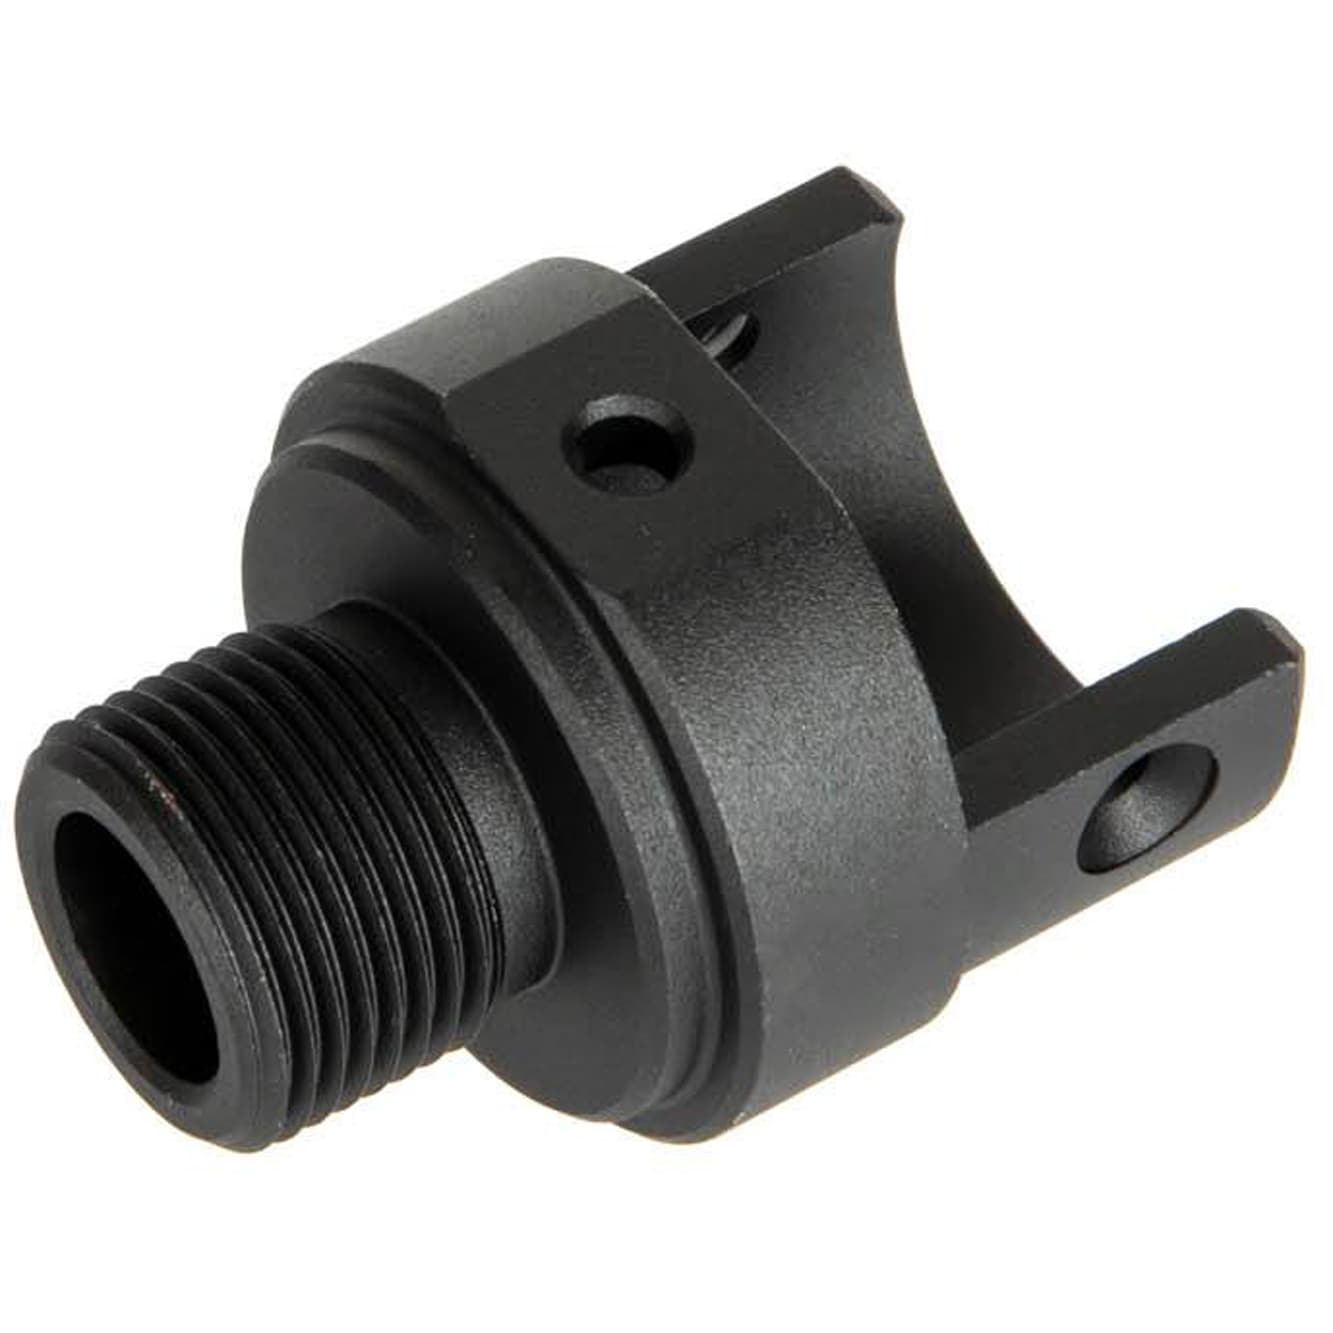 Upper Receiver Connector Action Army do replik AAP01 - Black 